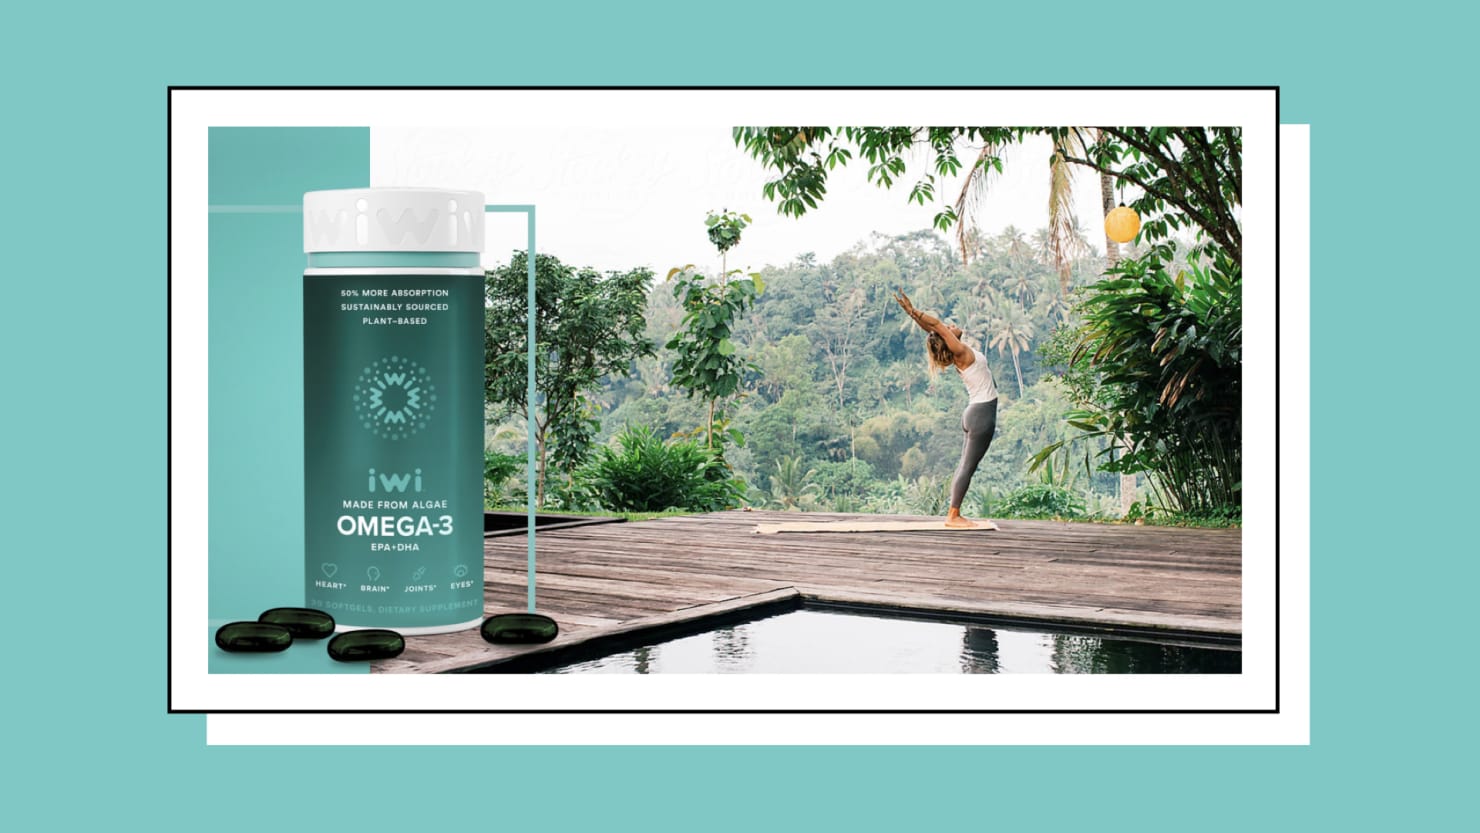 Support Your Health and the Environment With This Sustainable Omega-3 Supplement